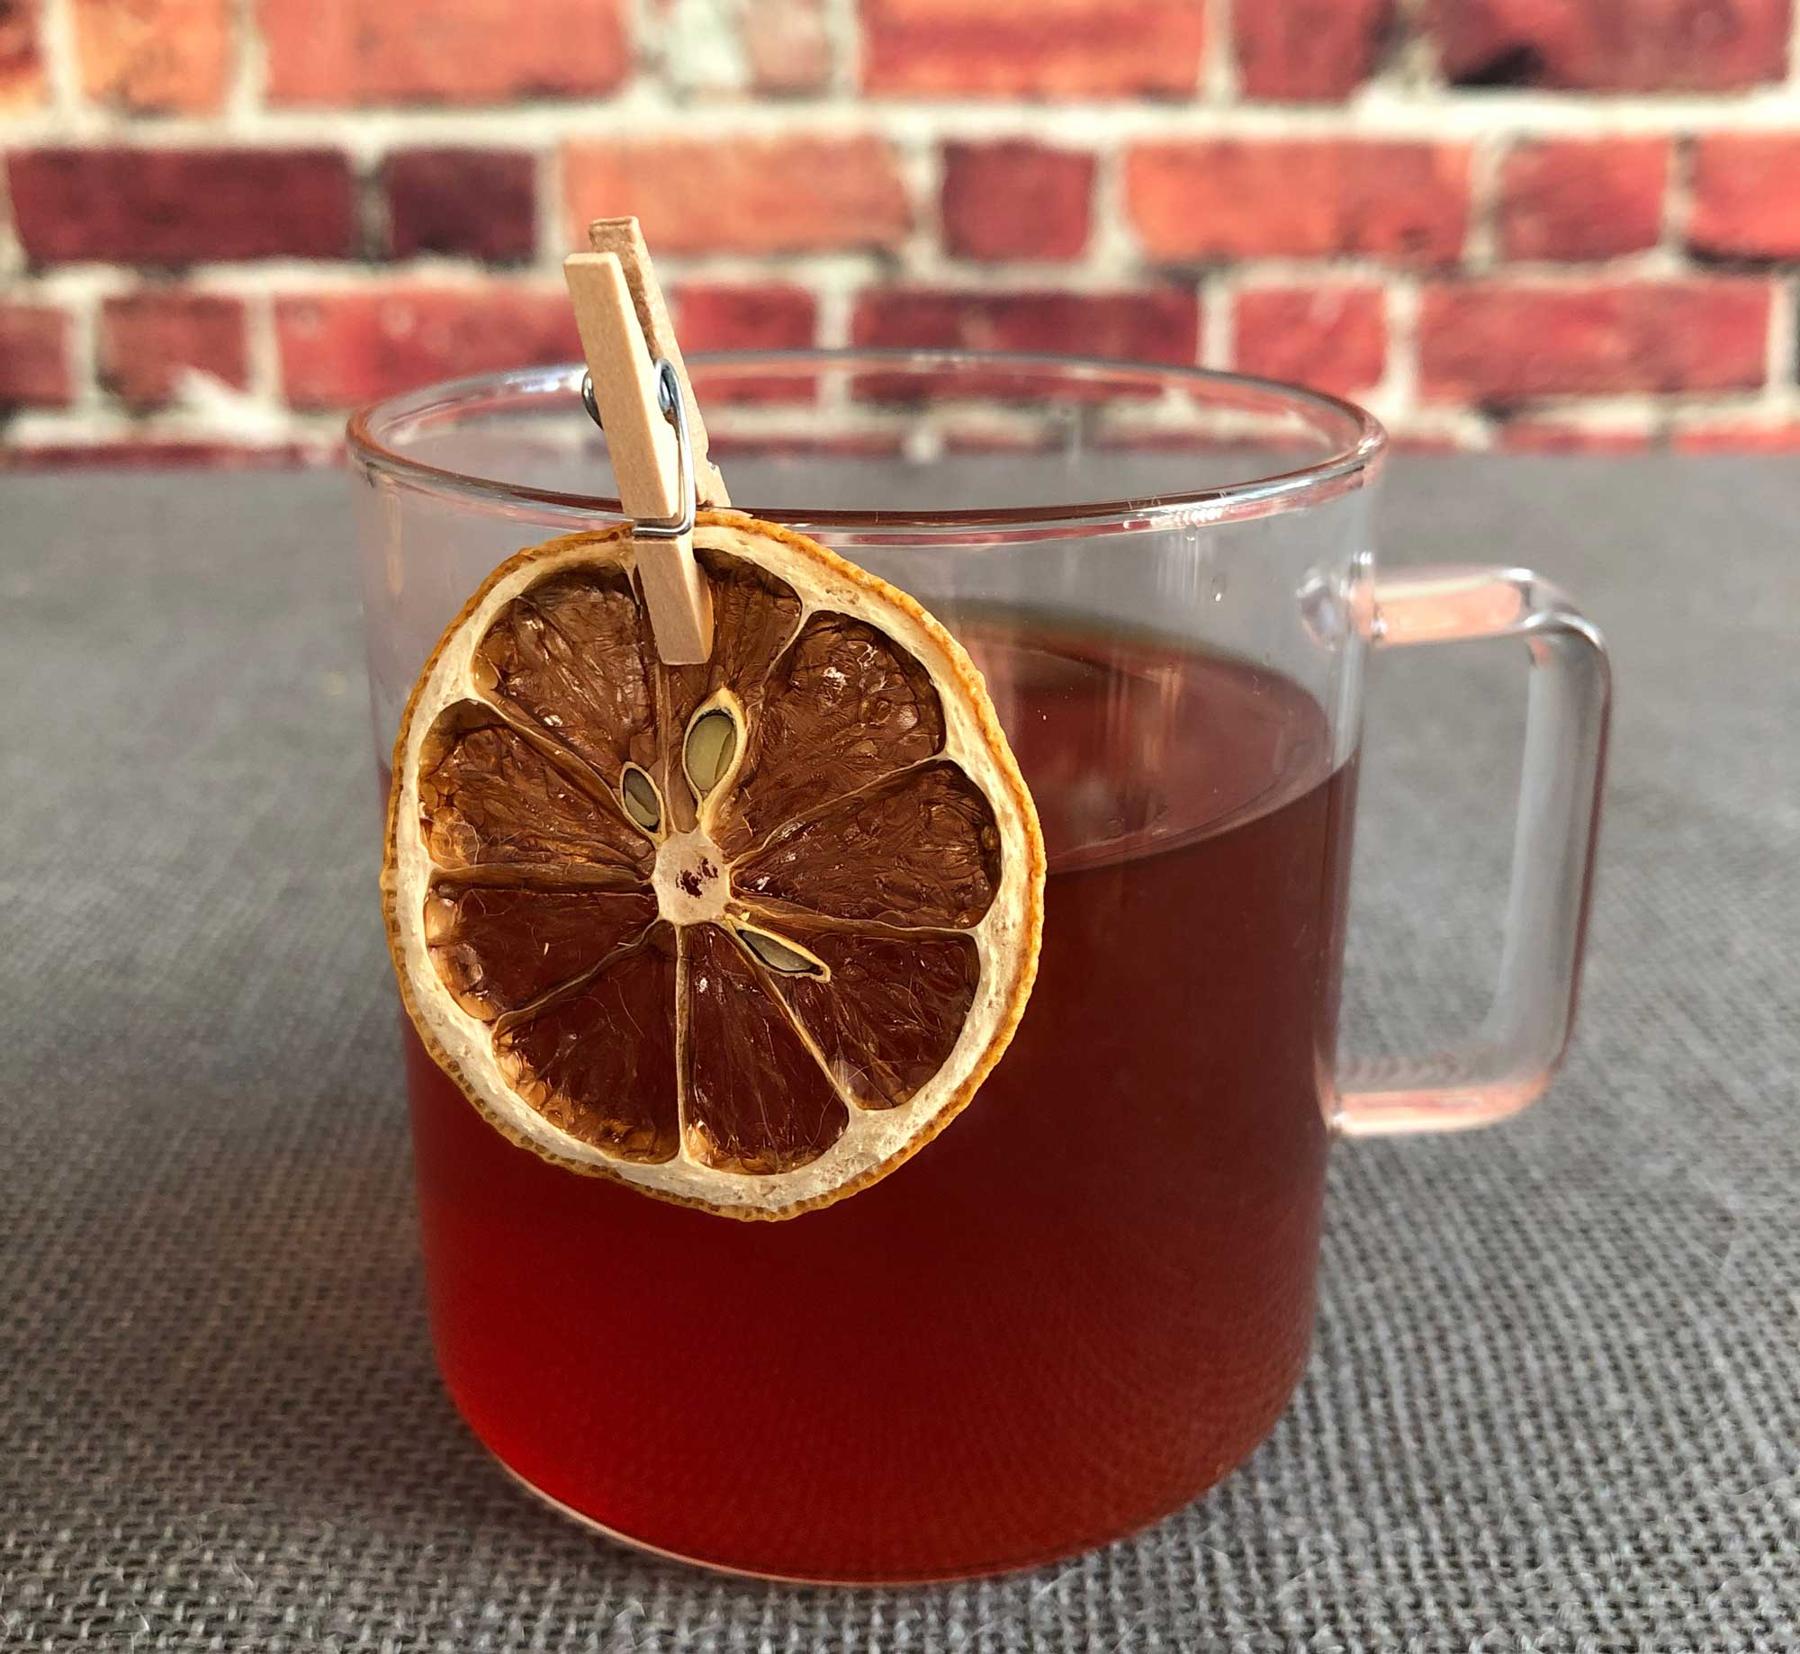 An example of the Bittered Ruby Punch, the mixed drink (drink) featuring black tea, Byrrh Grand Quinquina, Batavia Arrack van Oosten, lemon juice, sugar, and lemon wheel; photo by Lee Edwards